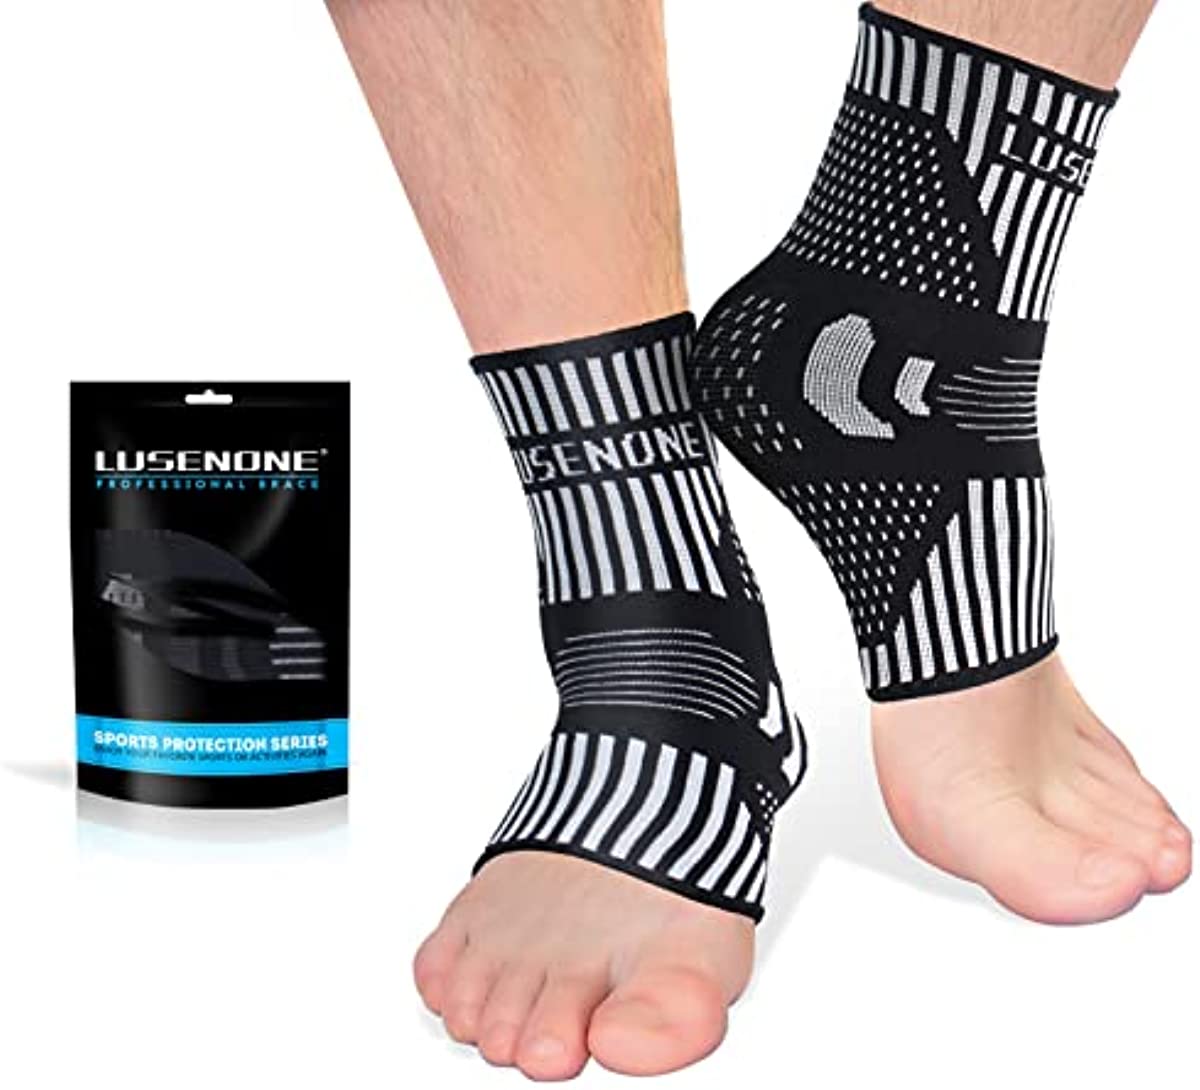 {New Version} Silver Infused Ankle Brace Support for Men & Women (Pair), Best Ankle Compression Sleeve Socks for Plantar Fasciitis, Sprained Ankle, Achilles Tendon, Joint Pain Relief, Ligament Damage, Recovery, Sports